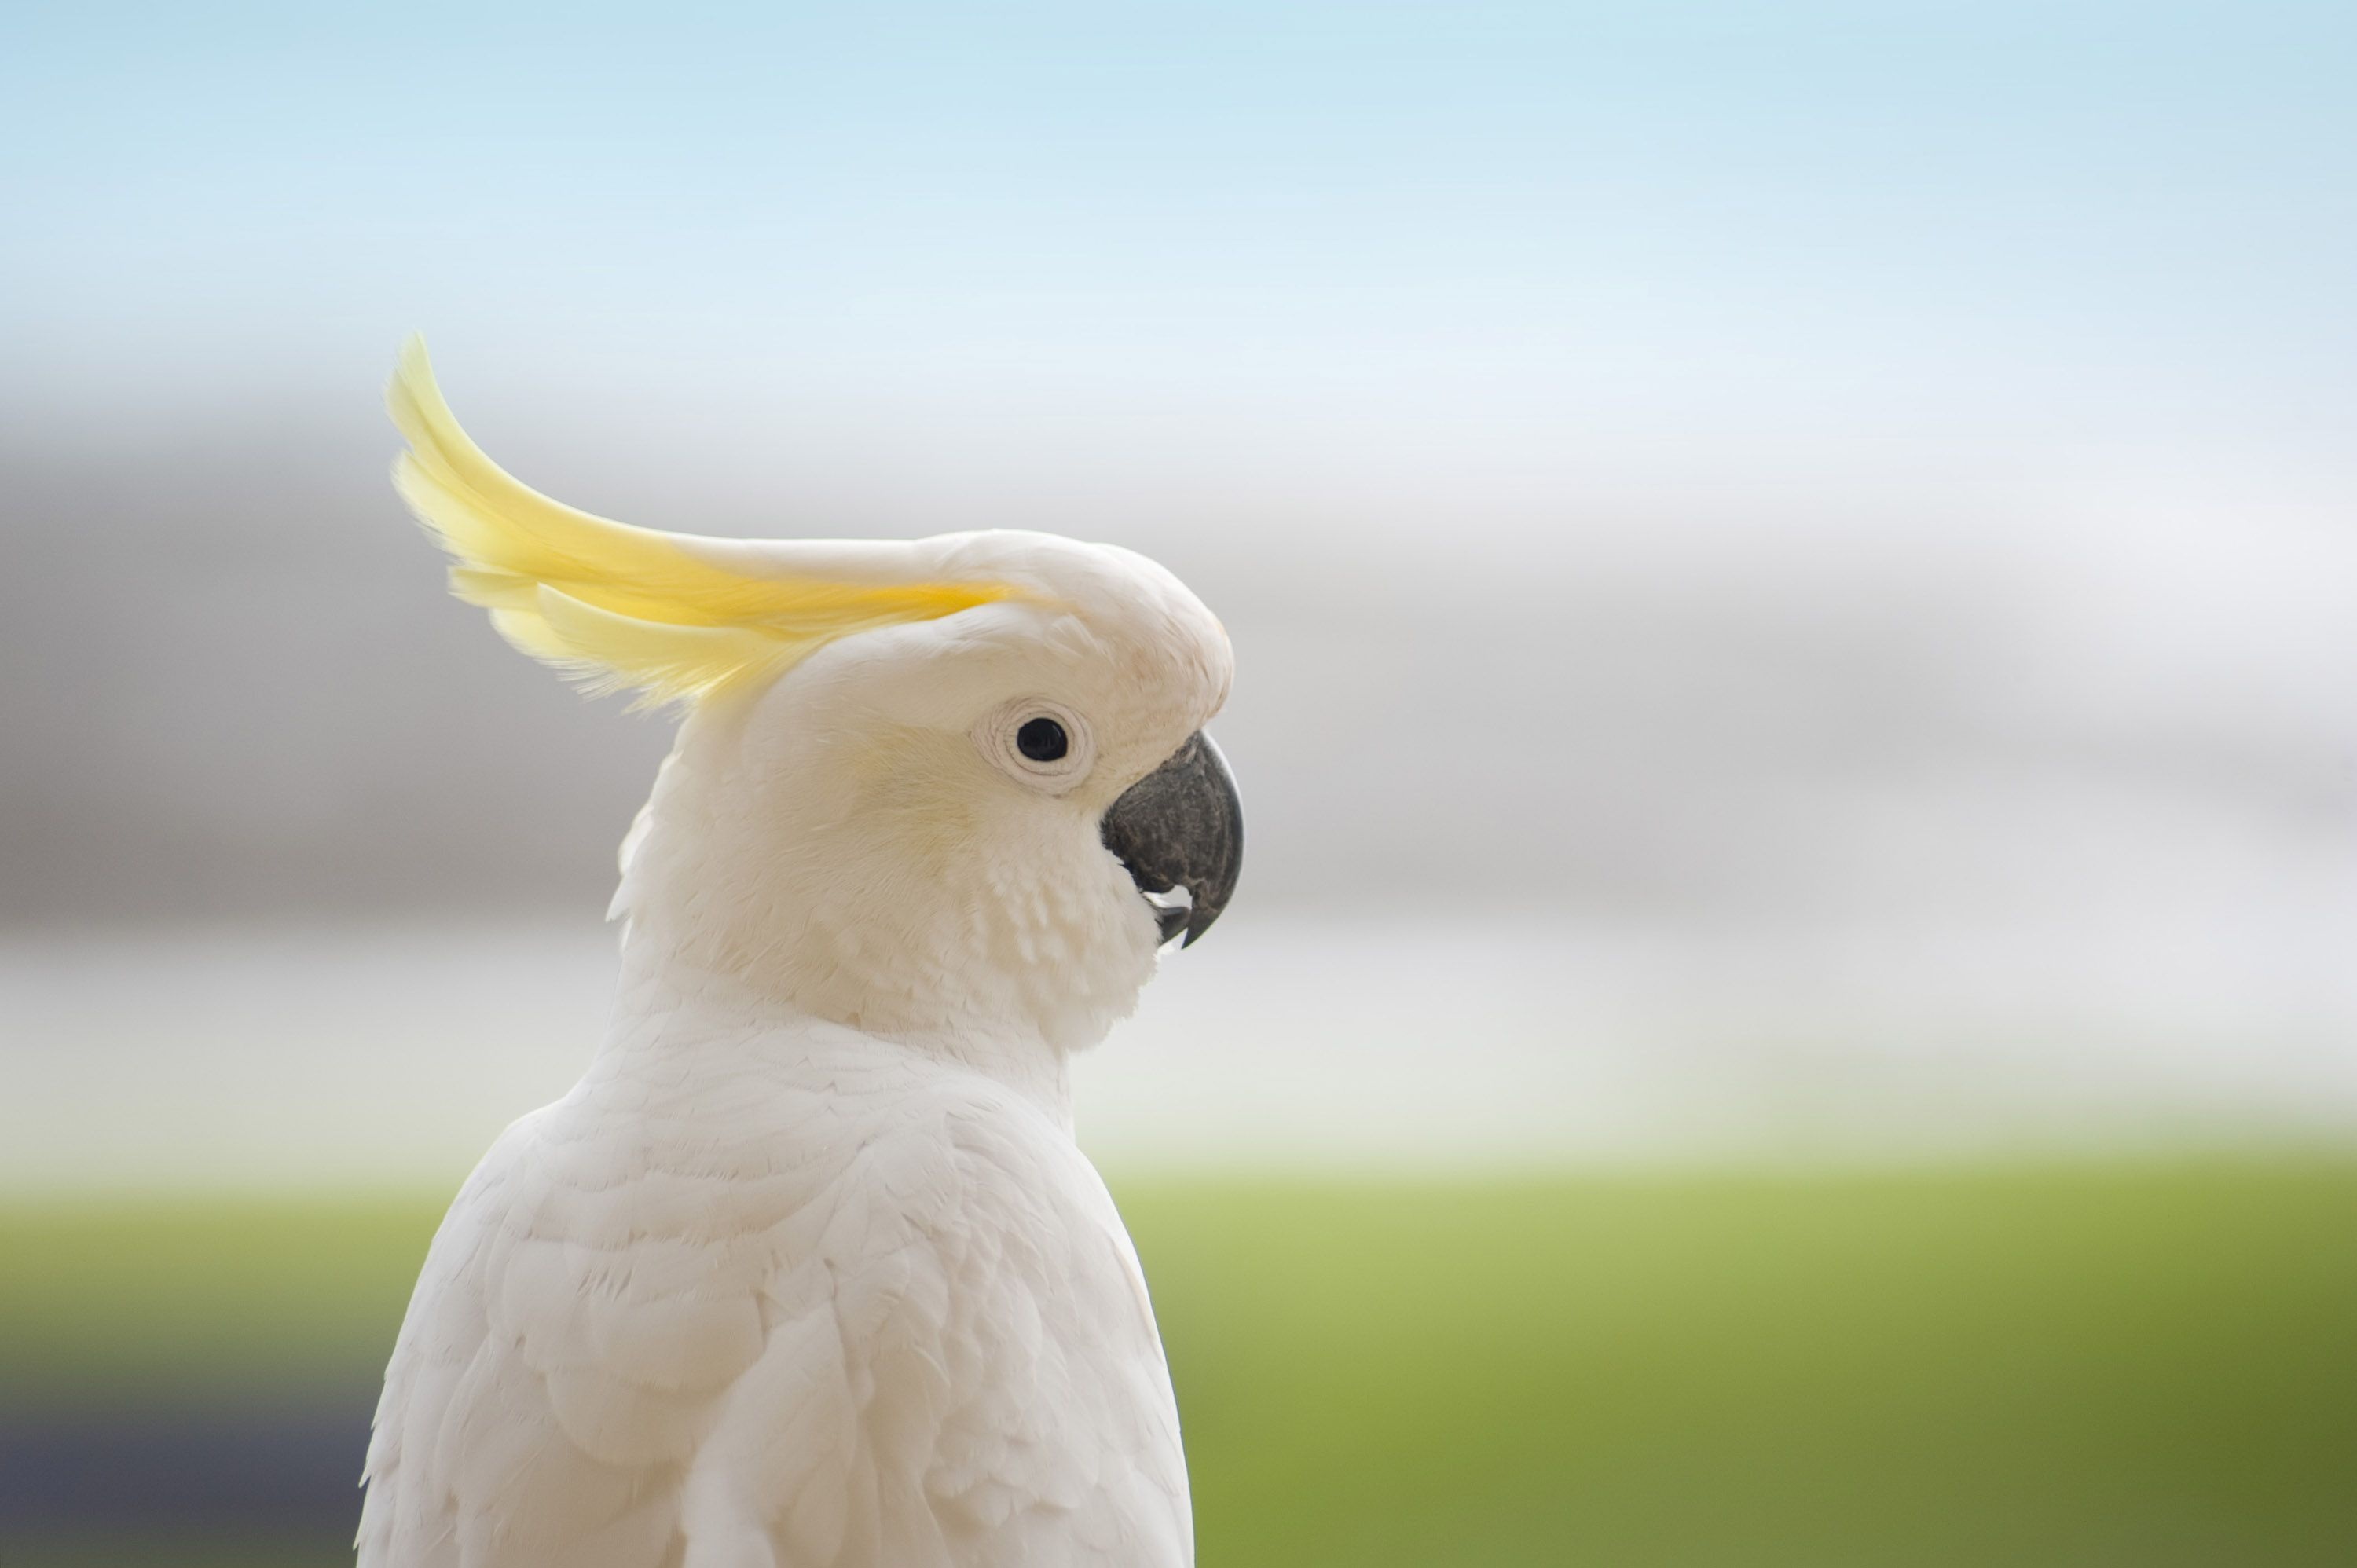 Cockatoo: Yellow-Crested White Bird In Nature Of Indonesia's Islands Of Sulawesi. 3000x2000 HD Wallpaper.